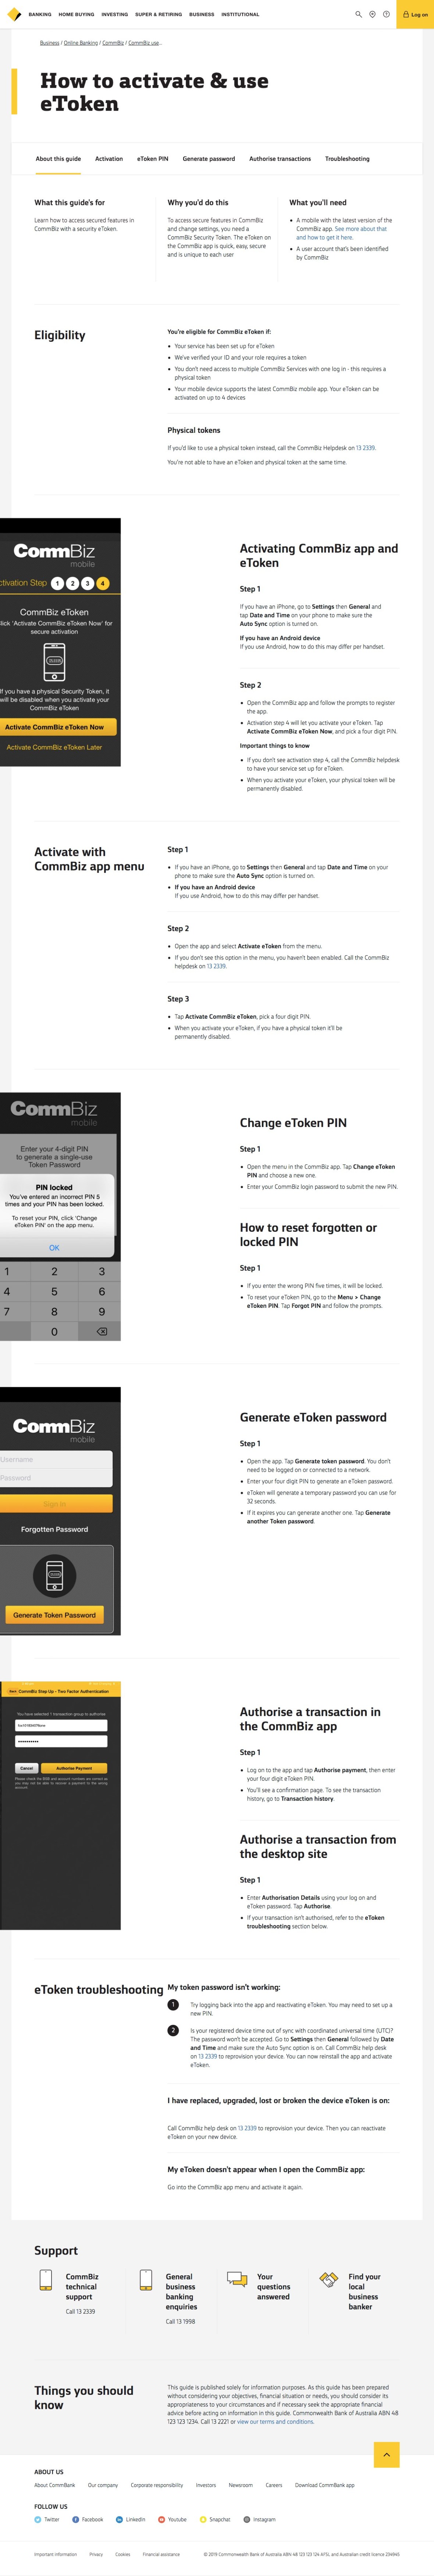 CommBank - How to activate and use eToken - CommBank